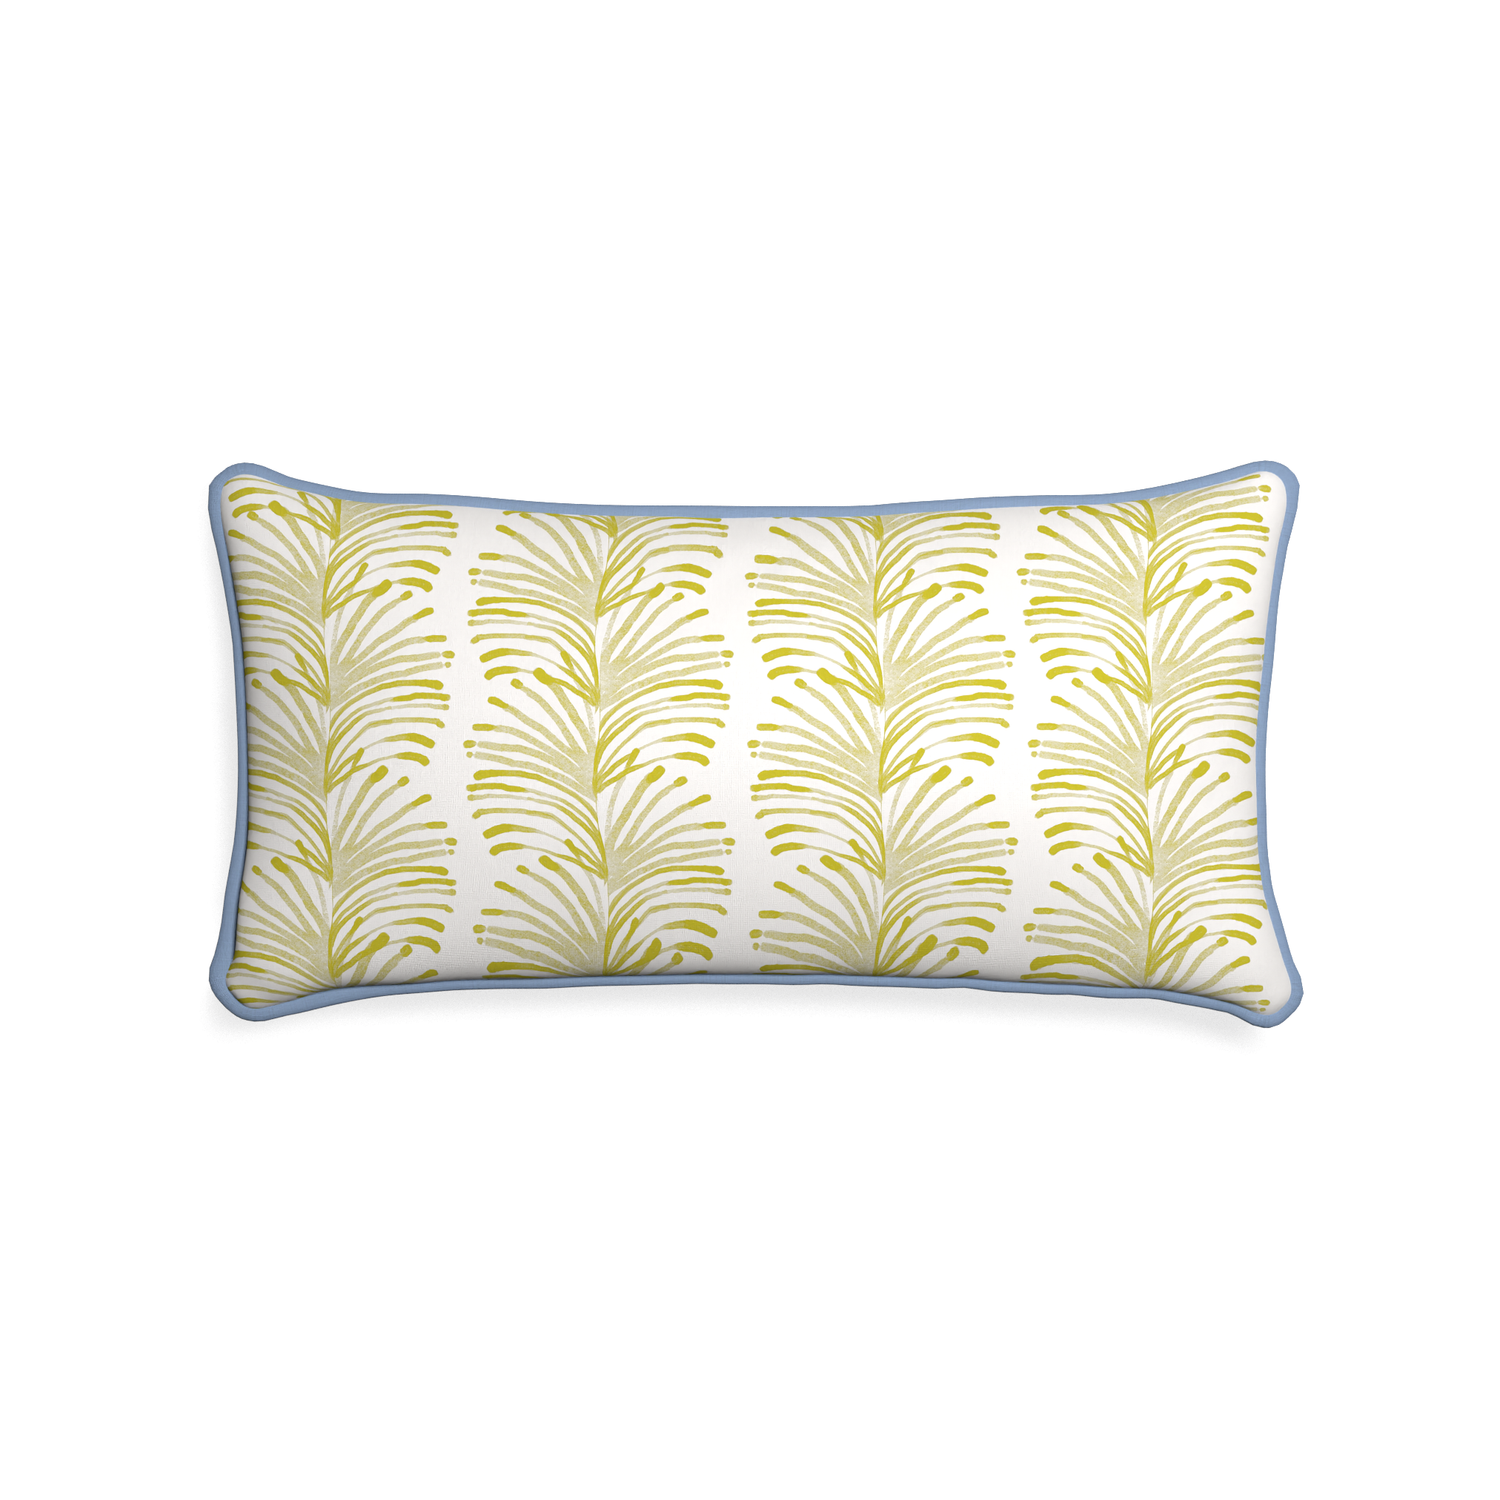 Midi-lumbar emma chartreuse custom yellow stripe chartreusepillow with sky piping on white background